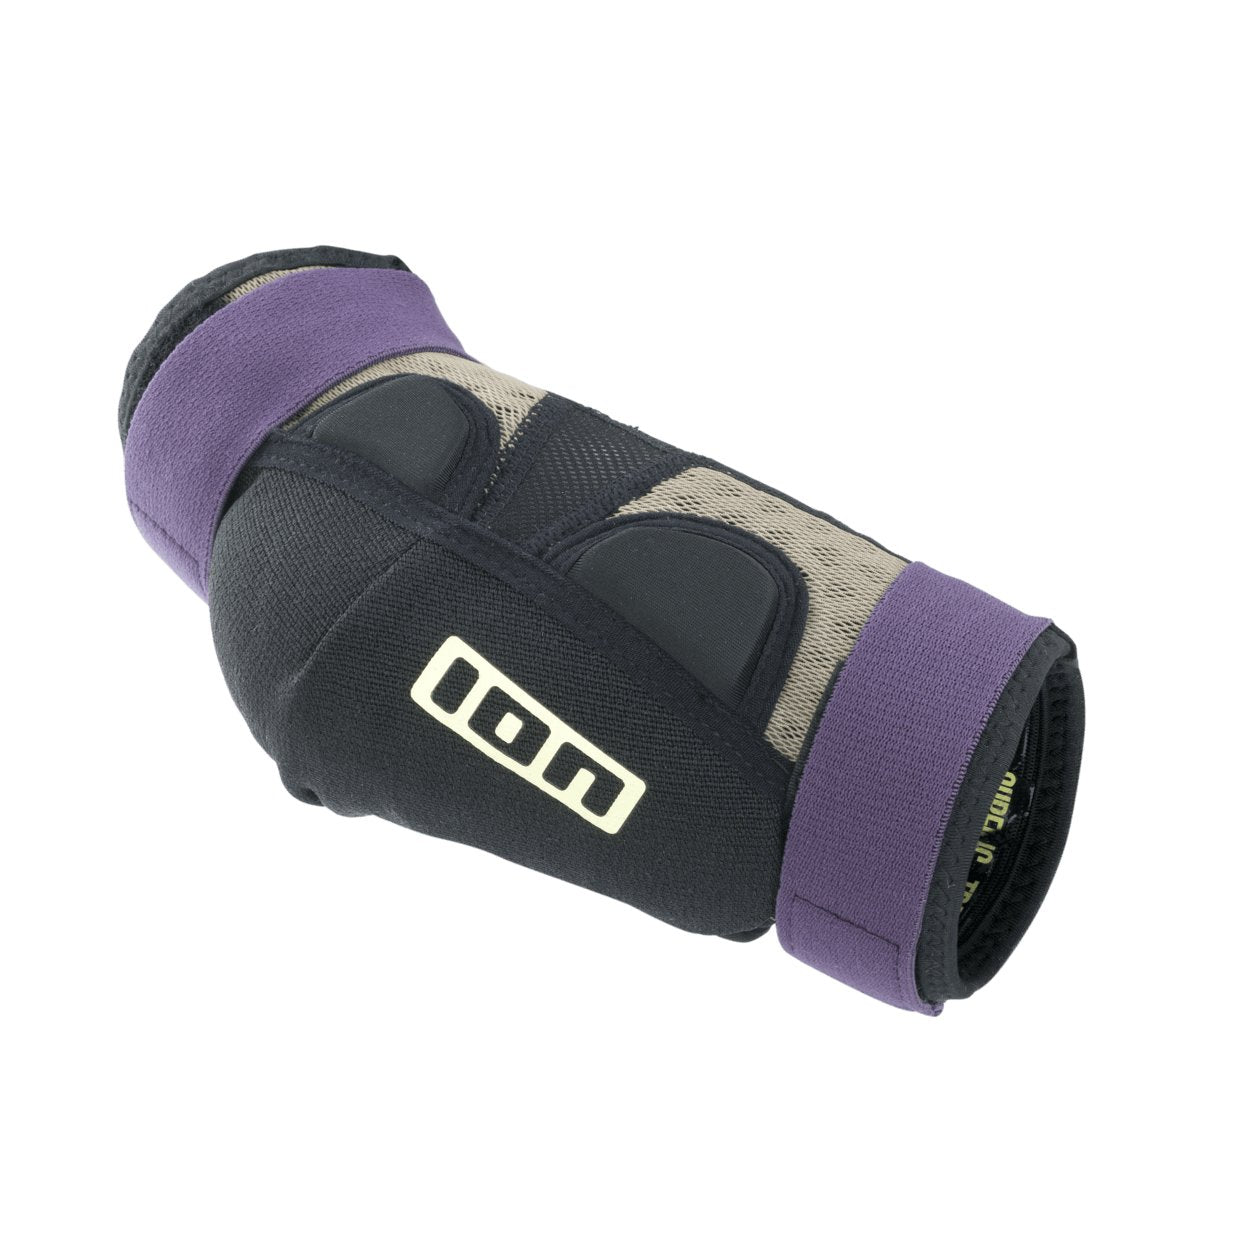 ION Youth MTB Elbow Pads E-Pact 2024 - Worthing Watersports - 9010583104638 - Body Armor - ION Bike